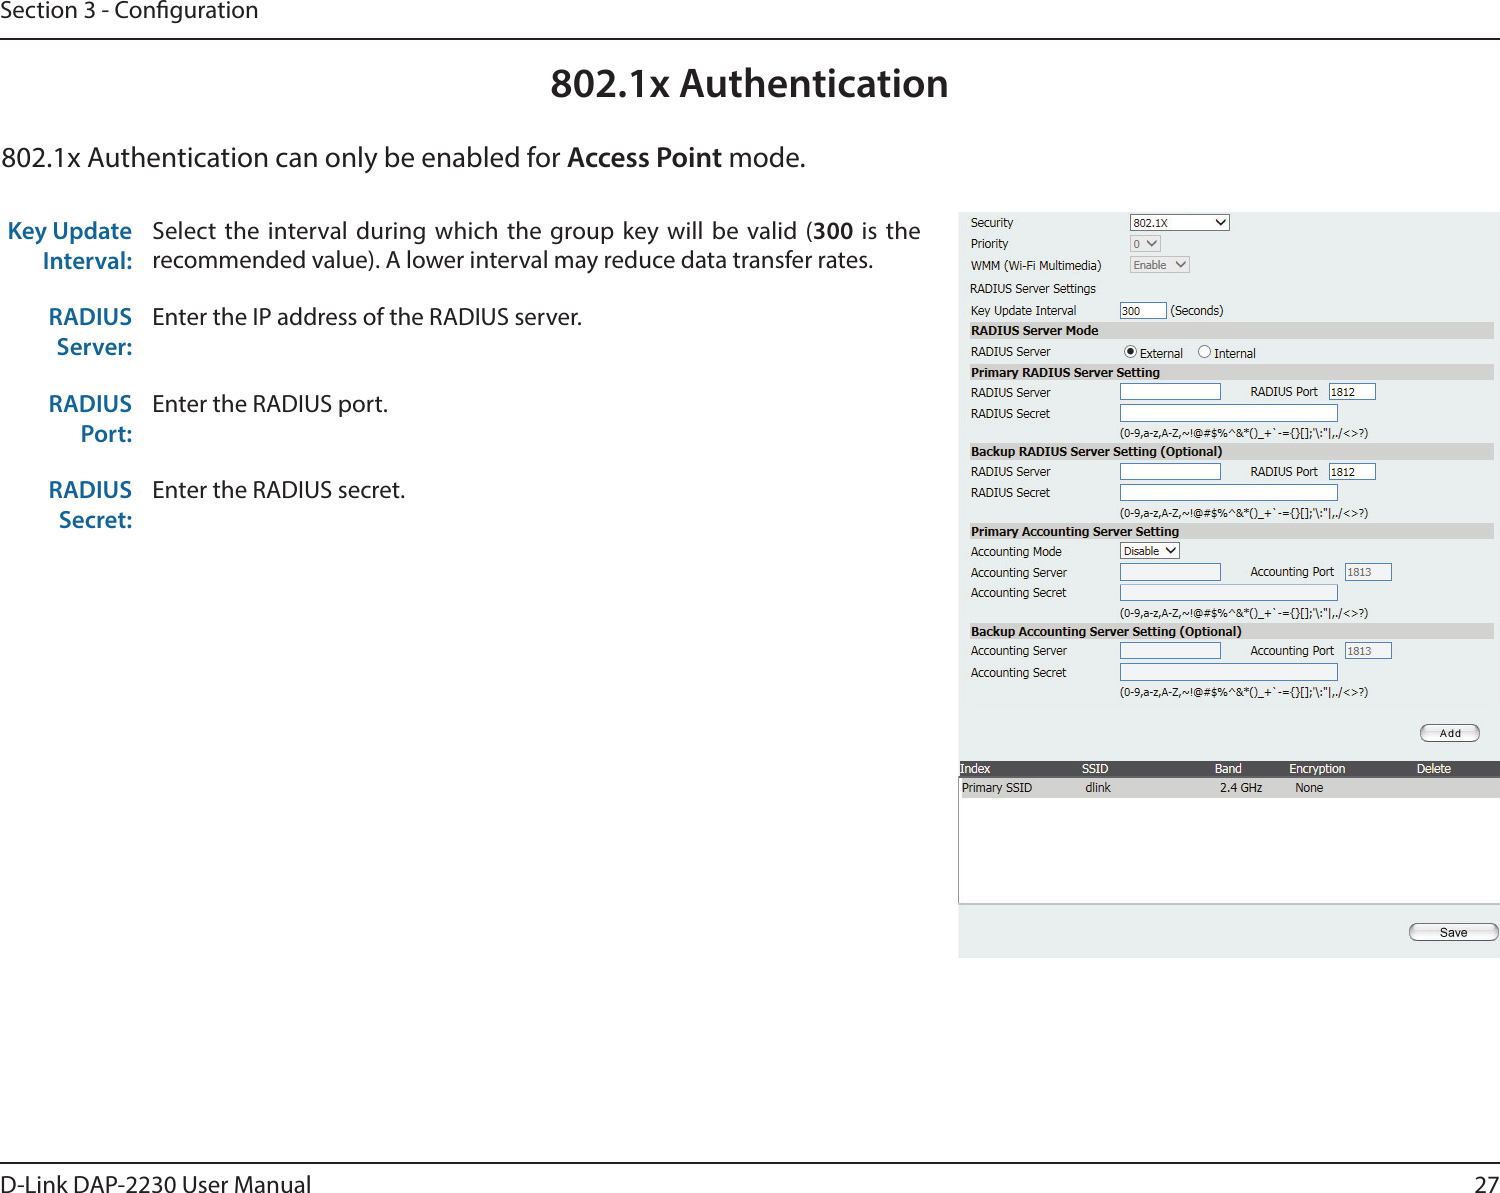 27D-Link DAP-2230 User ManualSection 3 - Conguration802.1x AuthenticationKey Update Interval: Select the interval during which the group key will be valid (300 is the recommended value). A lower interval may reduce data transfer rates.RADIUS Server:Enter the IP address of the RADIUS server.RADIUS Port:Enter the RADIUS port.RADIUS Secret:Enter the RADIUS secret.802.1x Authentication can only be enabled for Access Point mode.